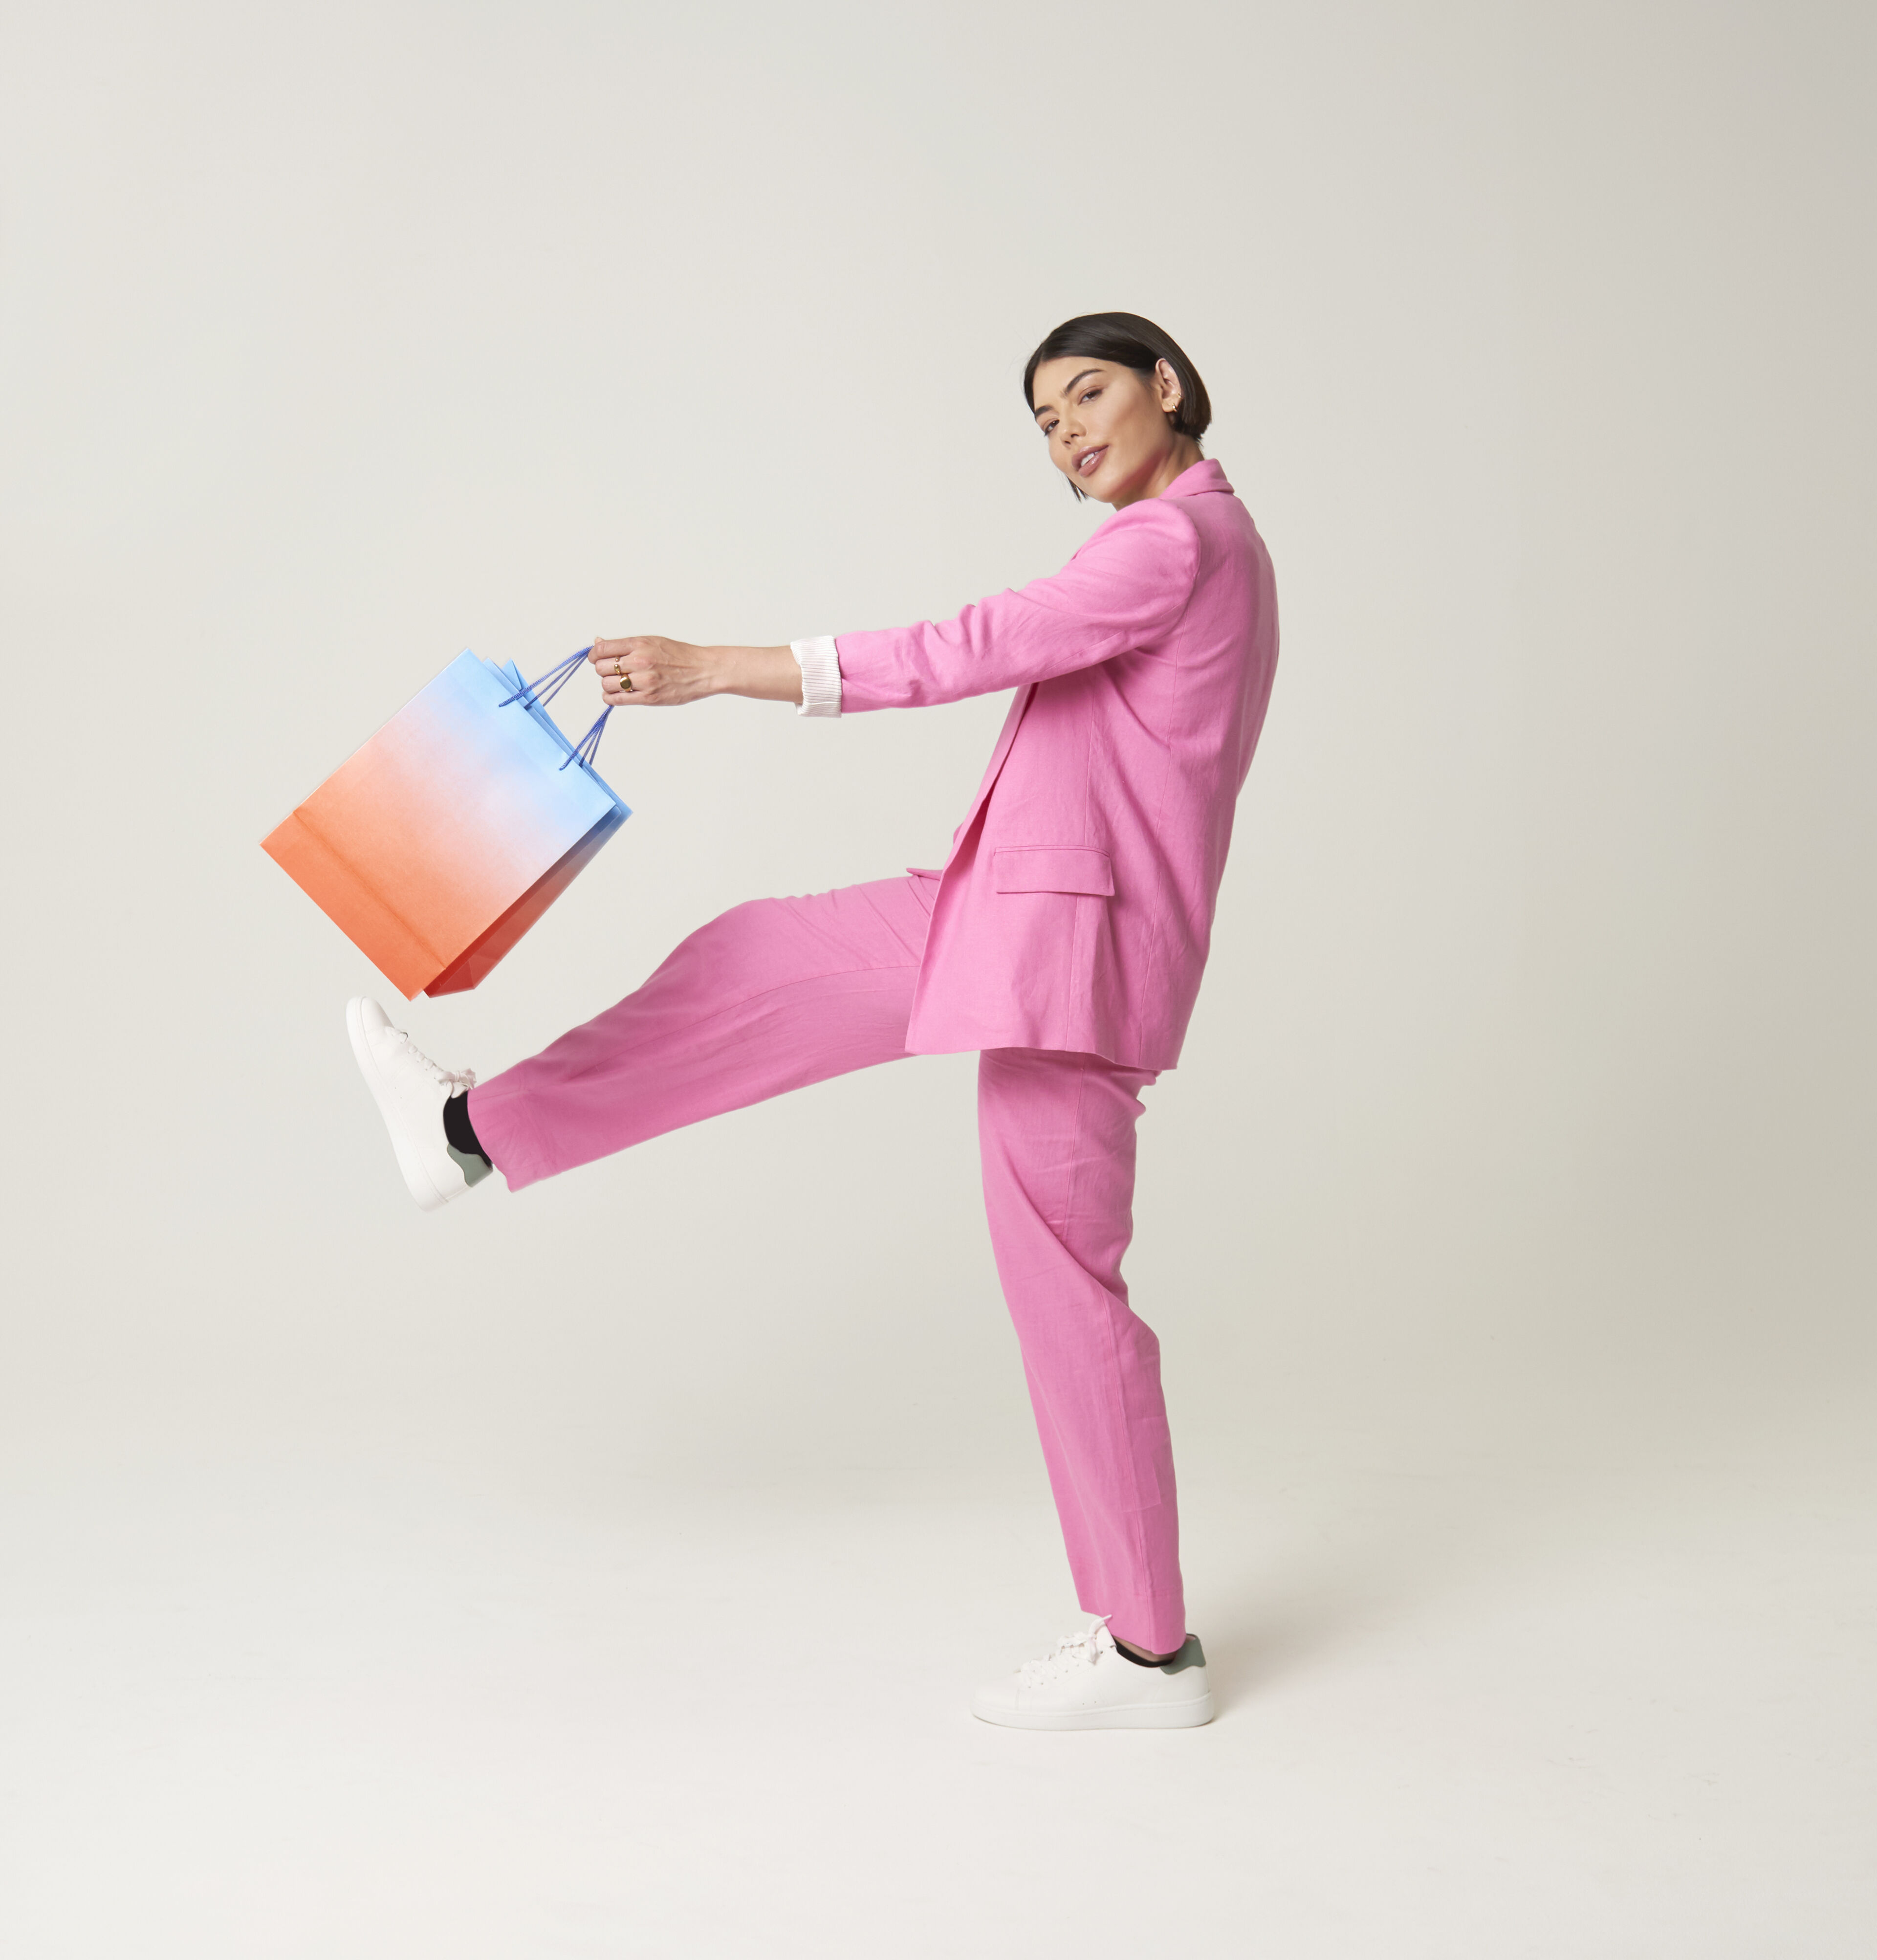 A stylish woman in a vibrant pink suit kicks up her leg while holding a colorful shopping bag, against a light background.